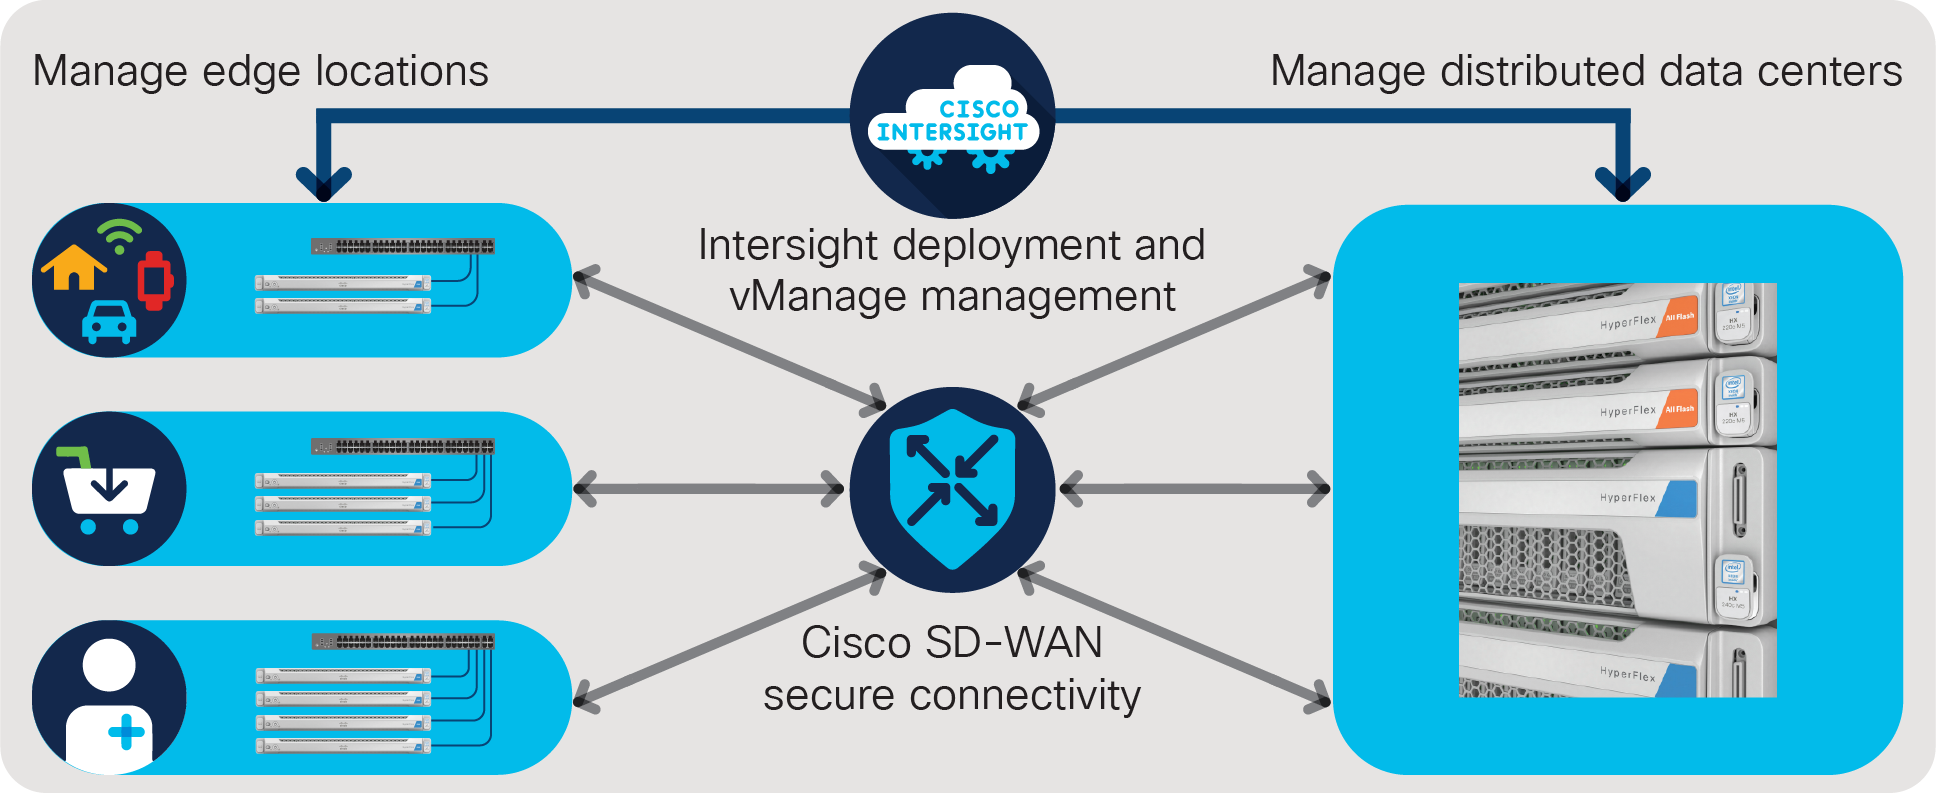 HyperFlex Edge and SD-WAN enable secure remote- and branch-office deployment at scale